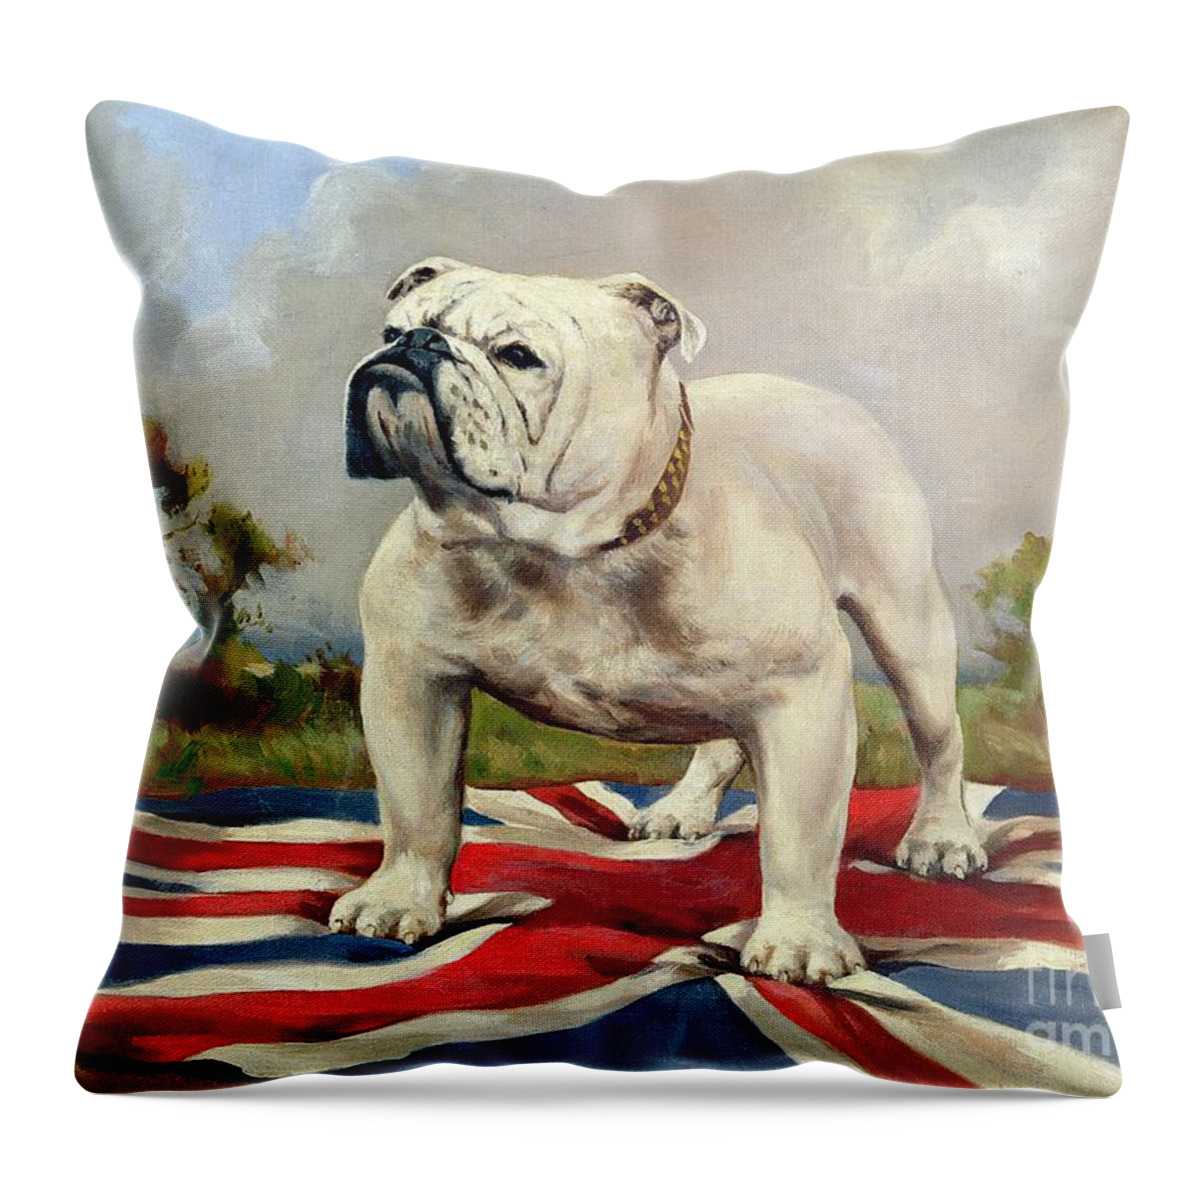 Union Jack Throw Pillow featuring the painting British Bulldog by English School